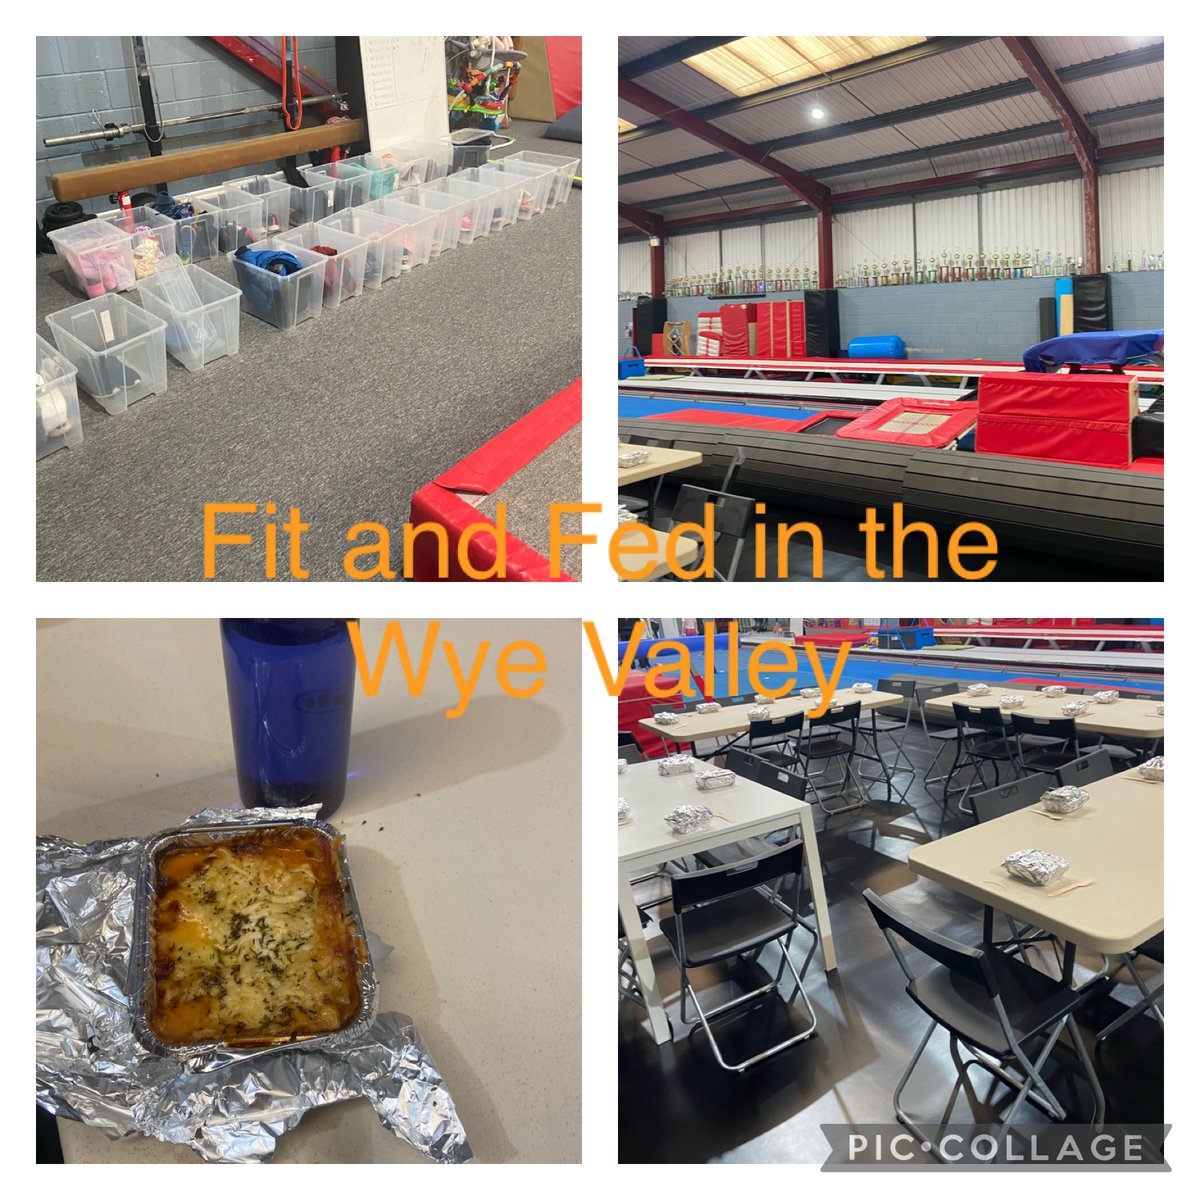 Freshly made lasagne (with veg hidden!) for the young people of @WyeAndGalaxy in Caldicot this afternoon with a treat of Welsh Cakes for pudding.  So many activities on offer for this wide range of young people. Thank you for having @rachelSGJones1 along to visit #FitandFed2023